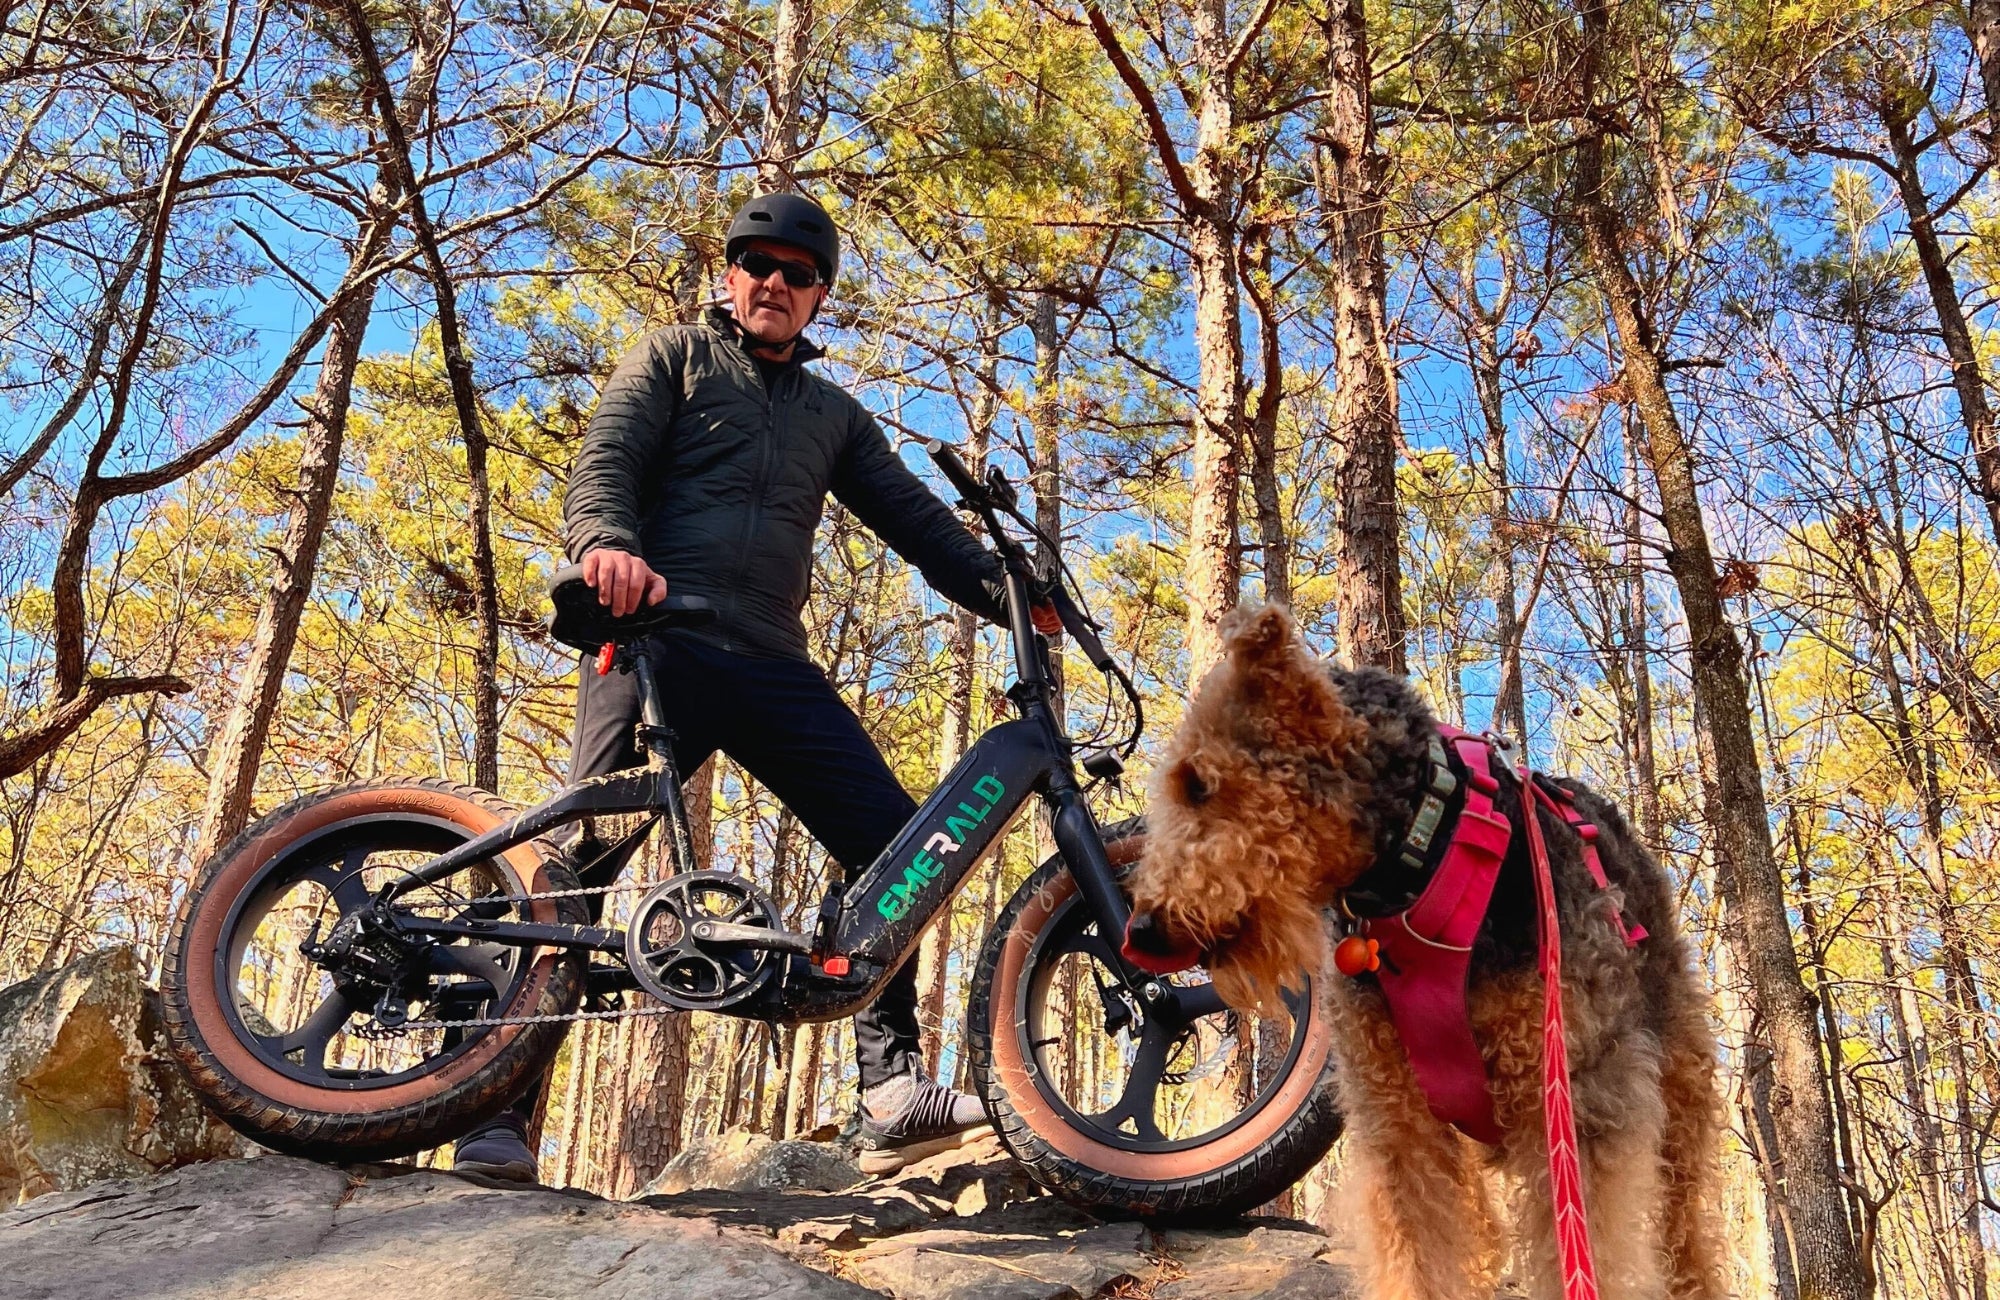 The Emerald Bike being driven on a biking trail next to a dog on a leash